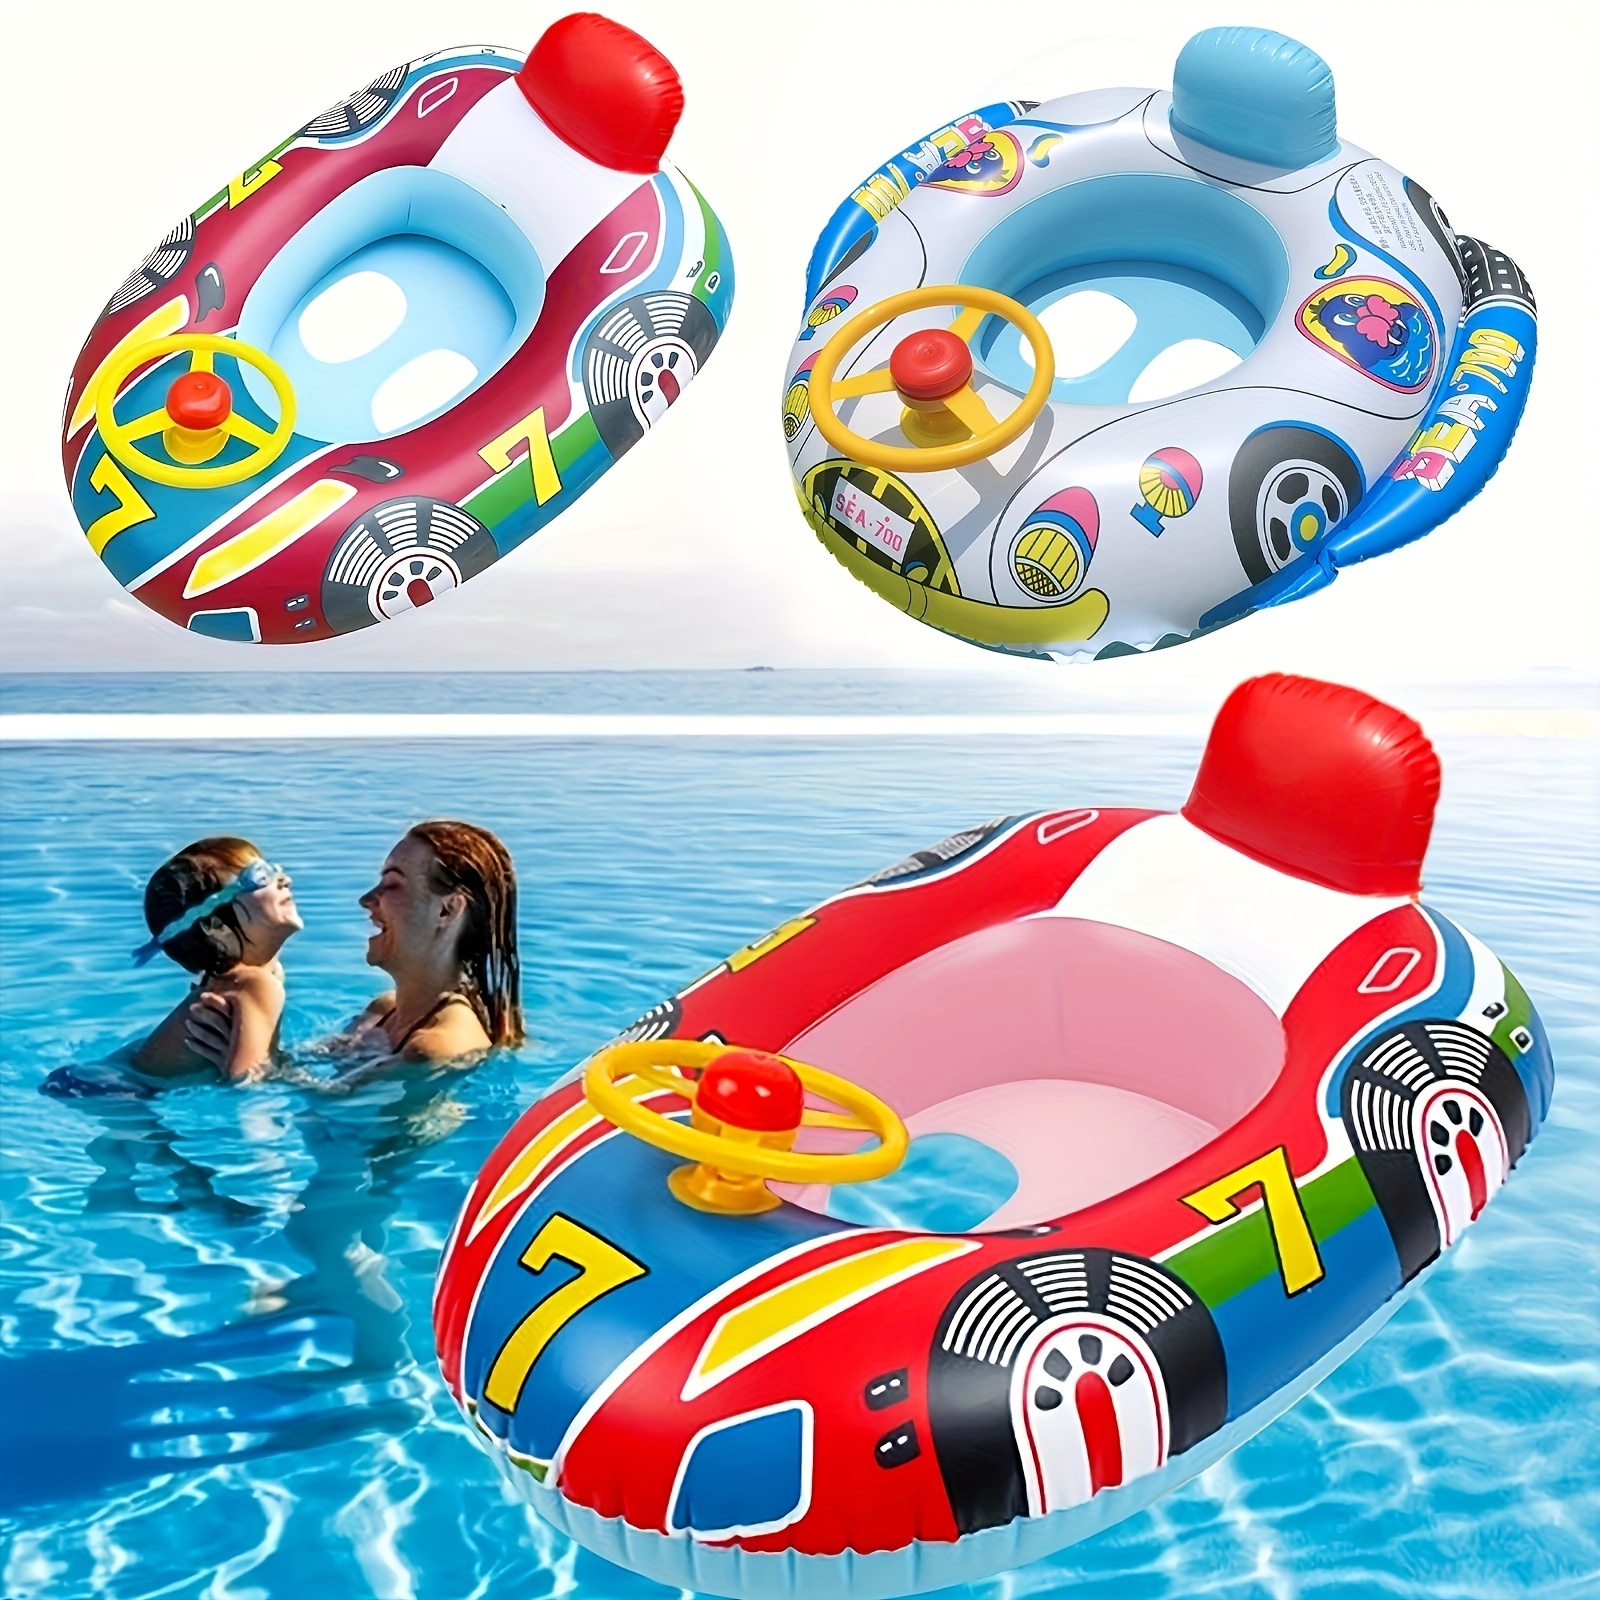 Children's Inflatable Small Yacht, Transparent Pvc Small Yacht